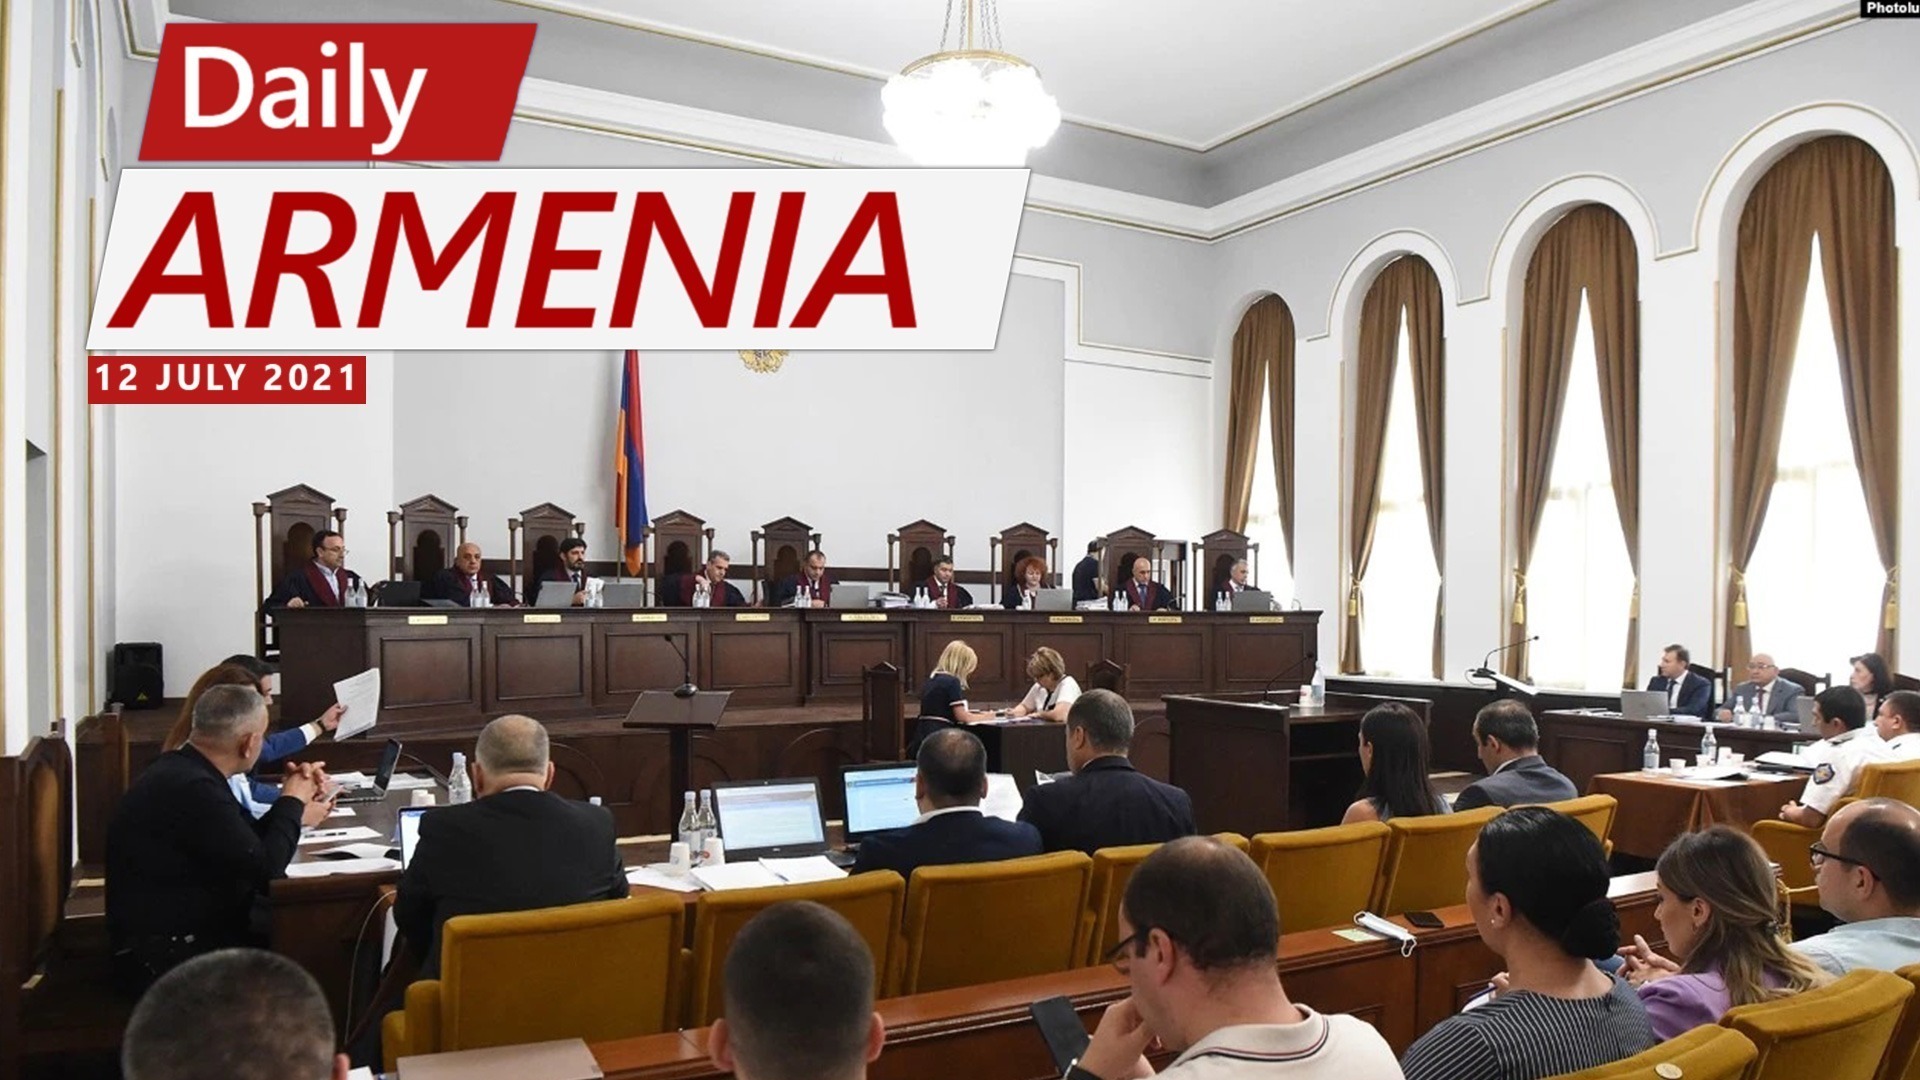 Hearings regarding June 20 election violations continue in Armenia’s High Court